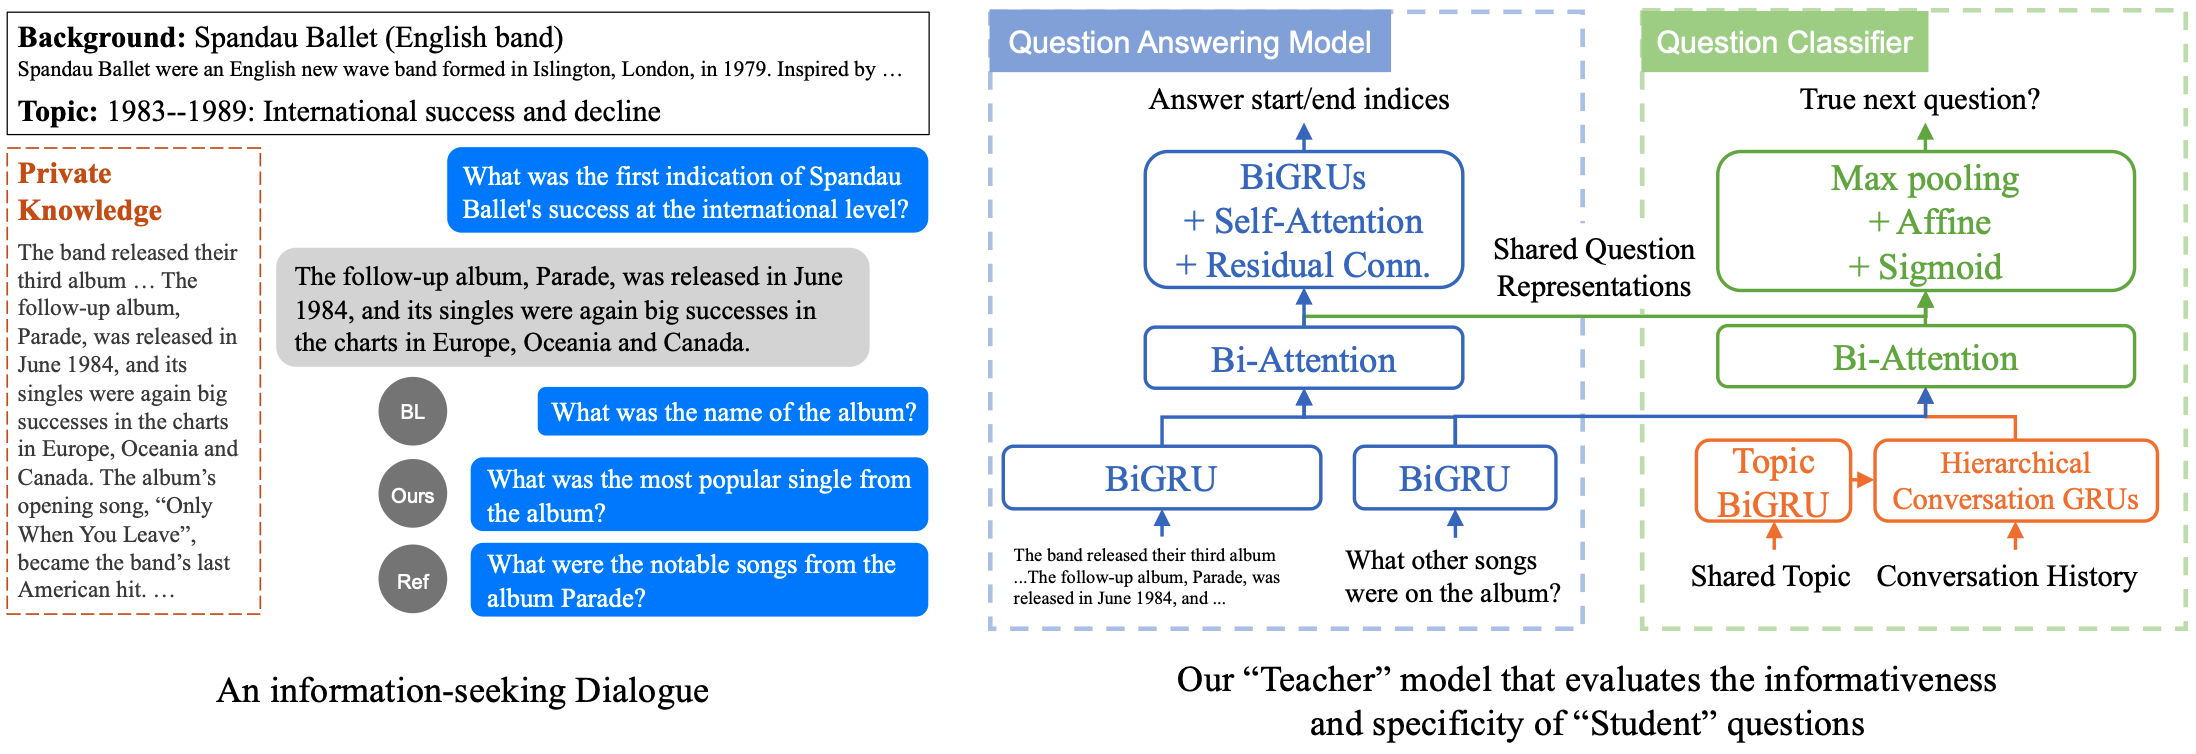 The information-seeking dialogue setting and the "teacher" model that helps our model generate informative and specific questions.